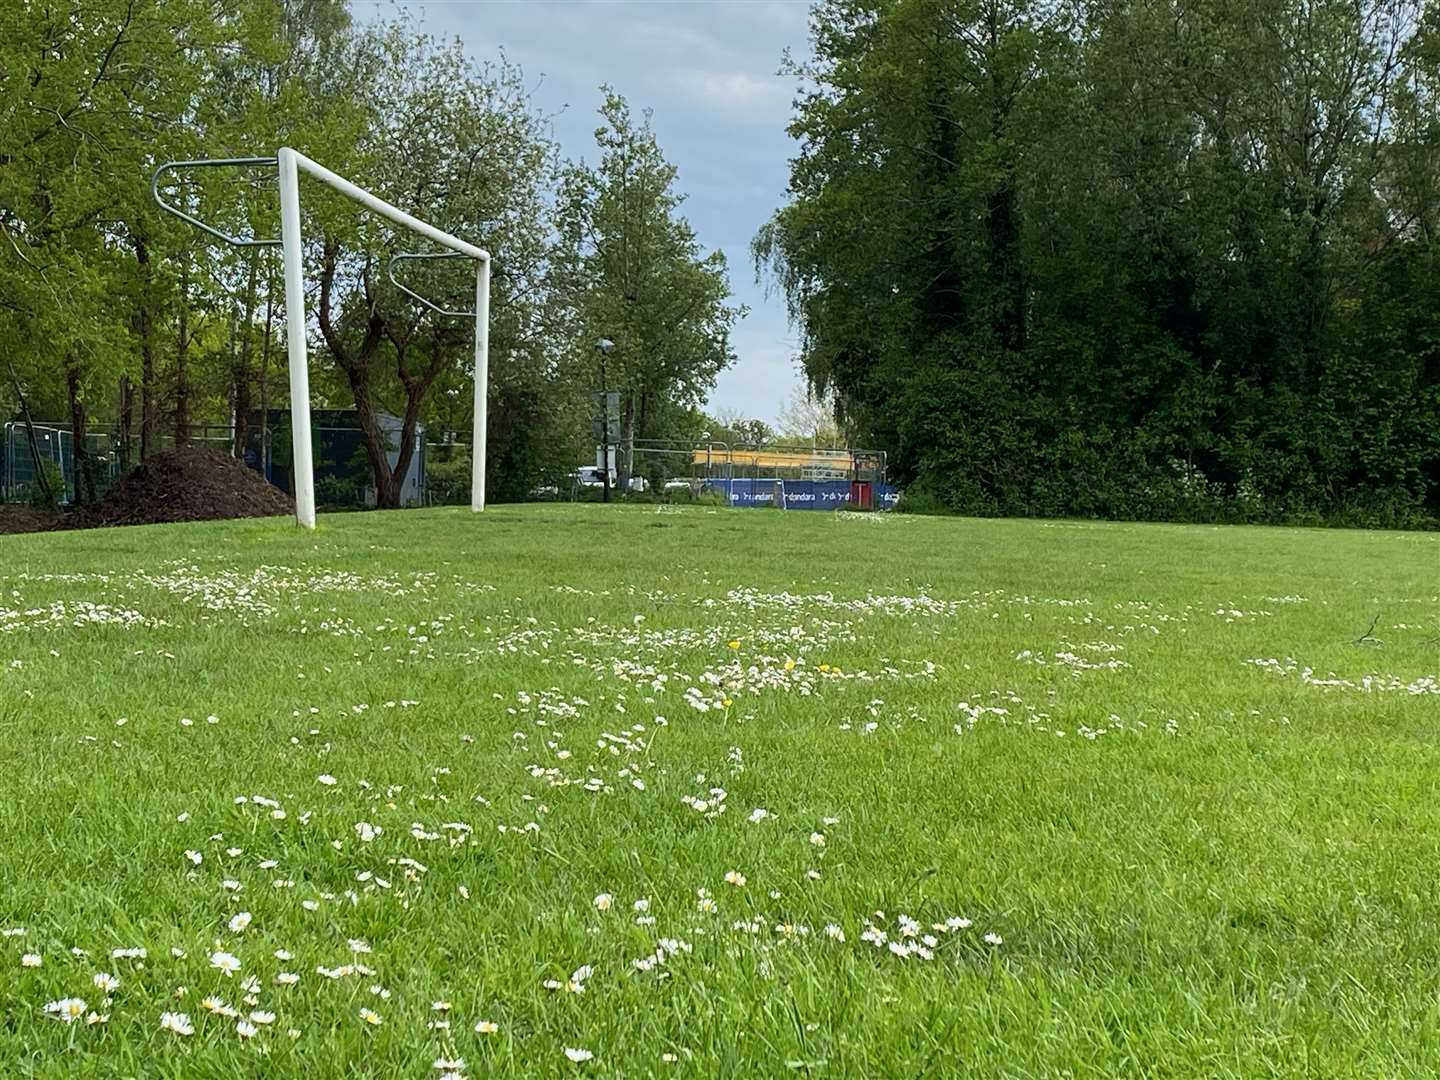 The Tenterden rec's pitch is used throughout the year by the town's teams